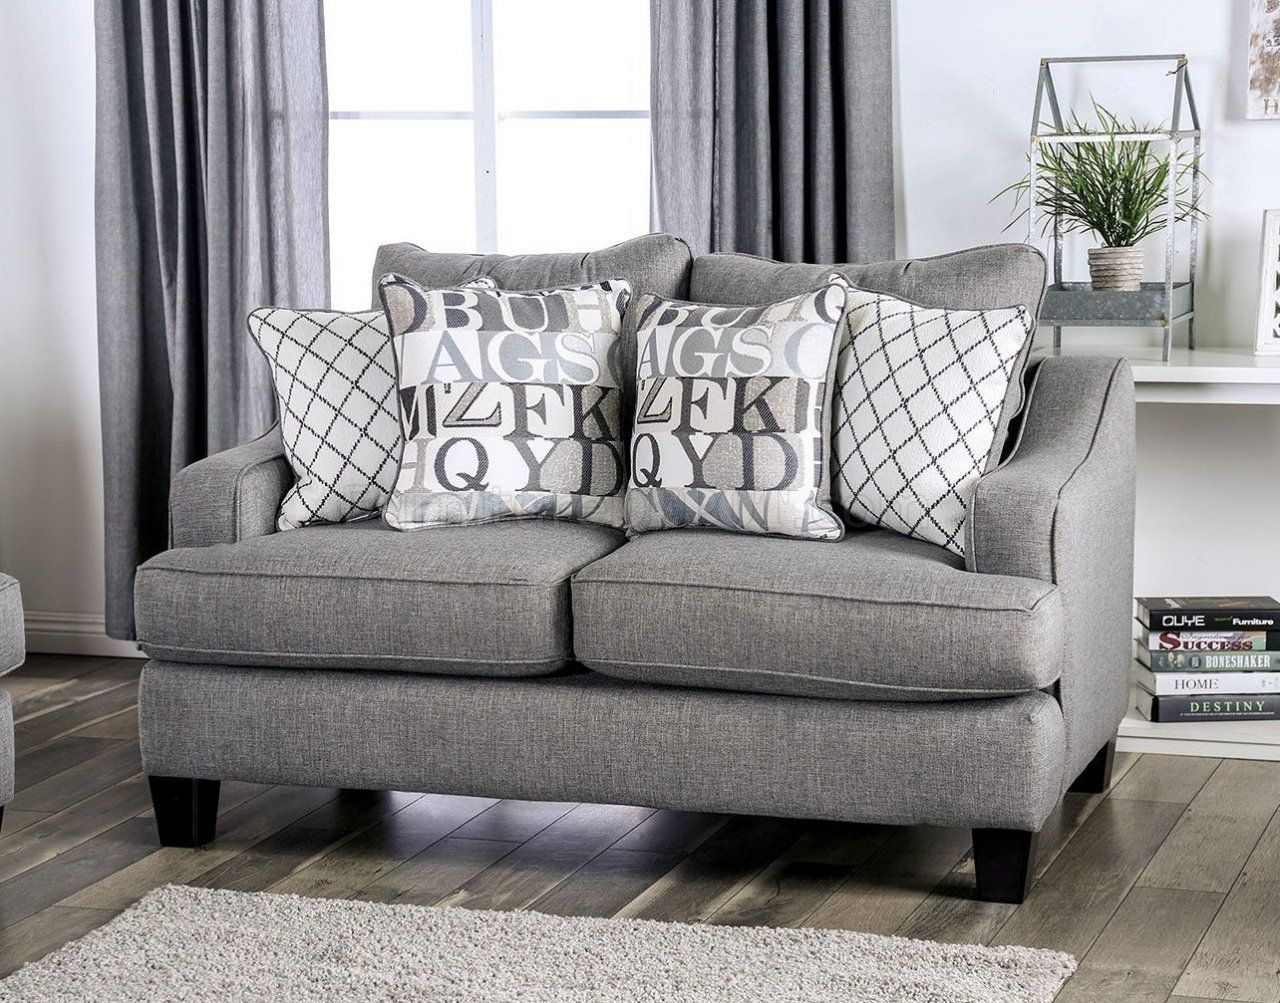 Verne Sofa Sm8330 In Bluish Gray Linen Like Fabric W/options With Sofas In Bluish Grey (Gallery 7 of 20)